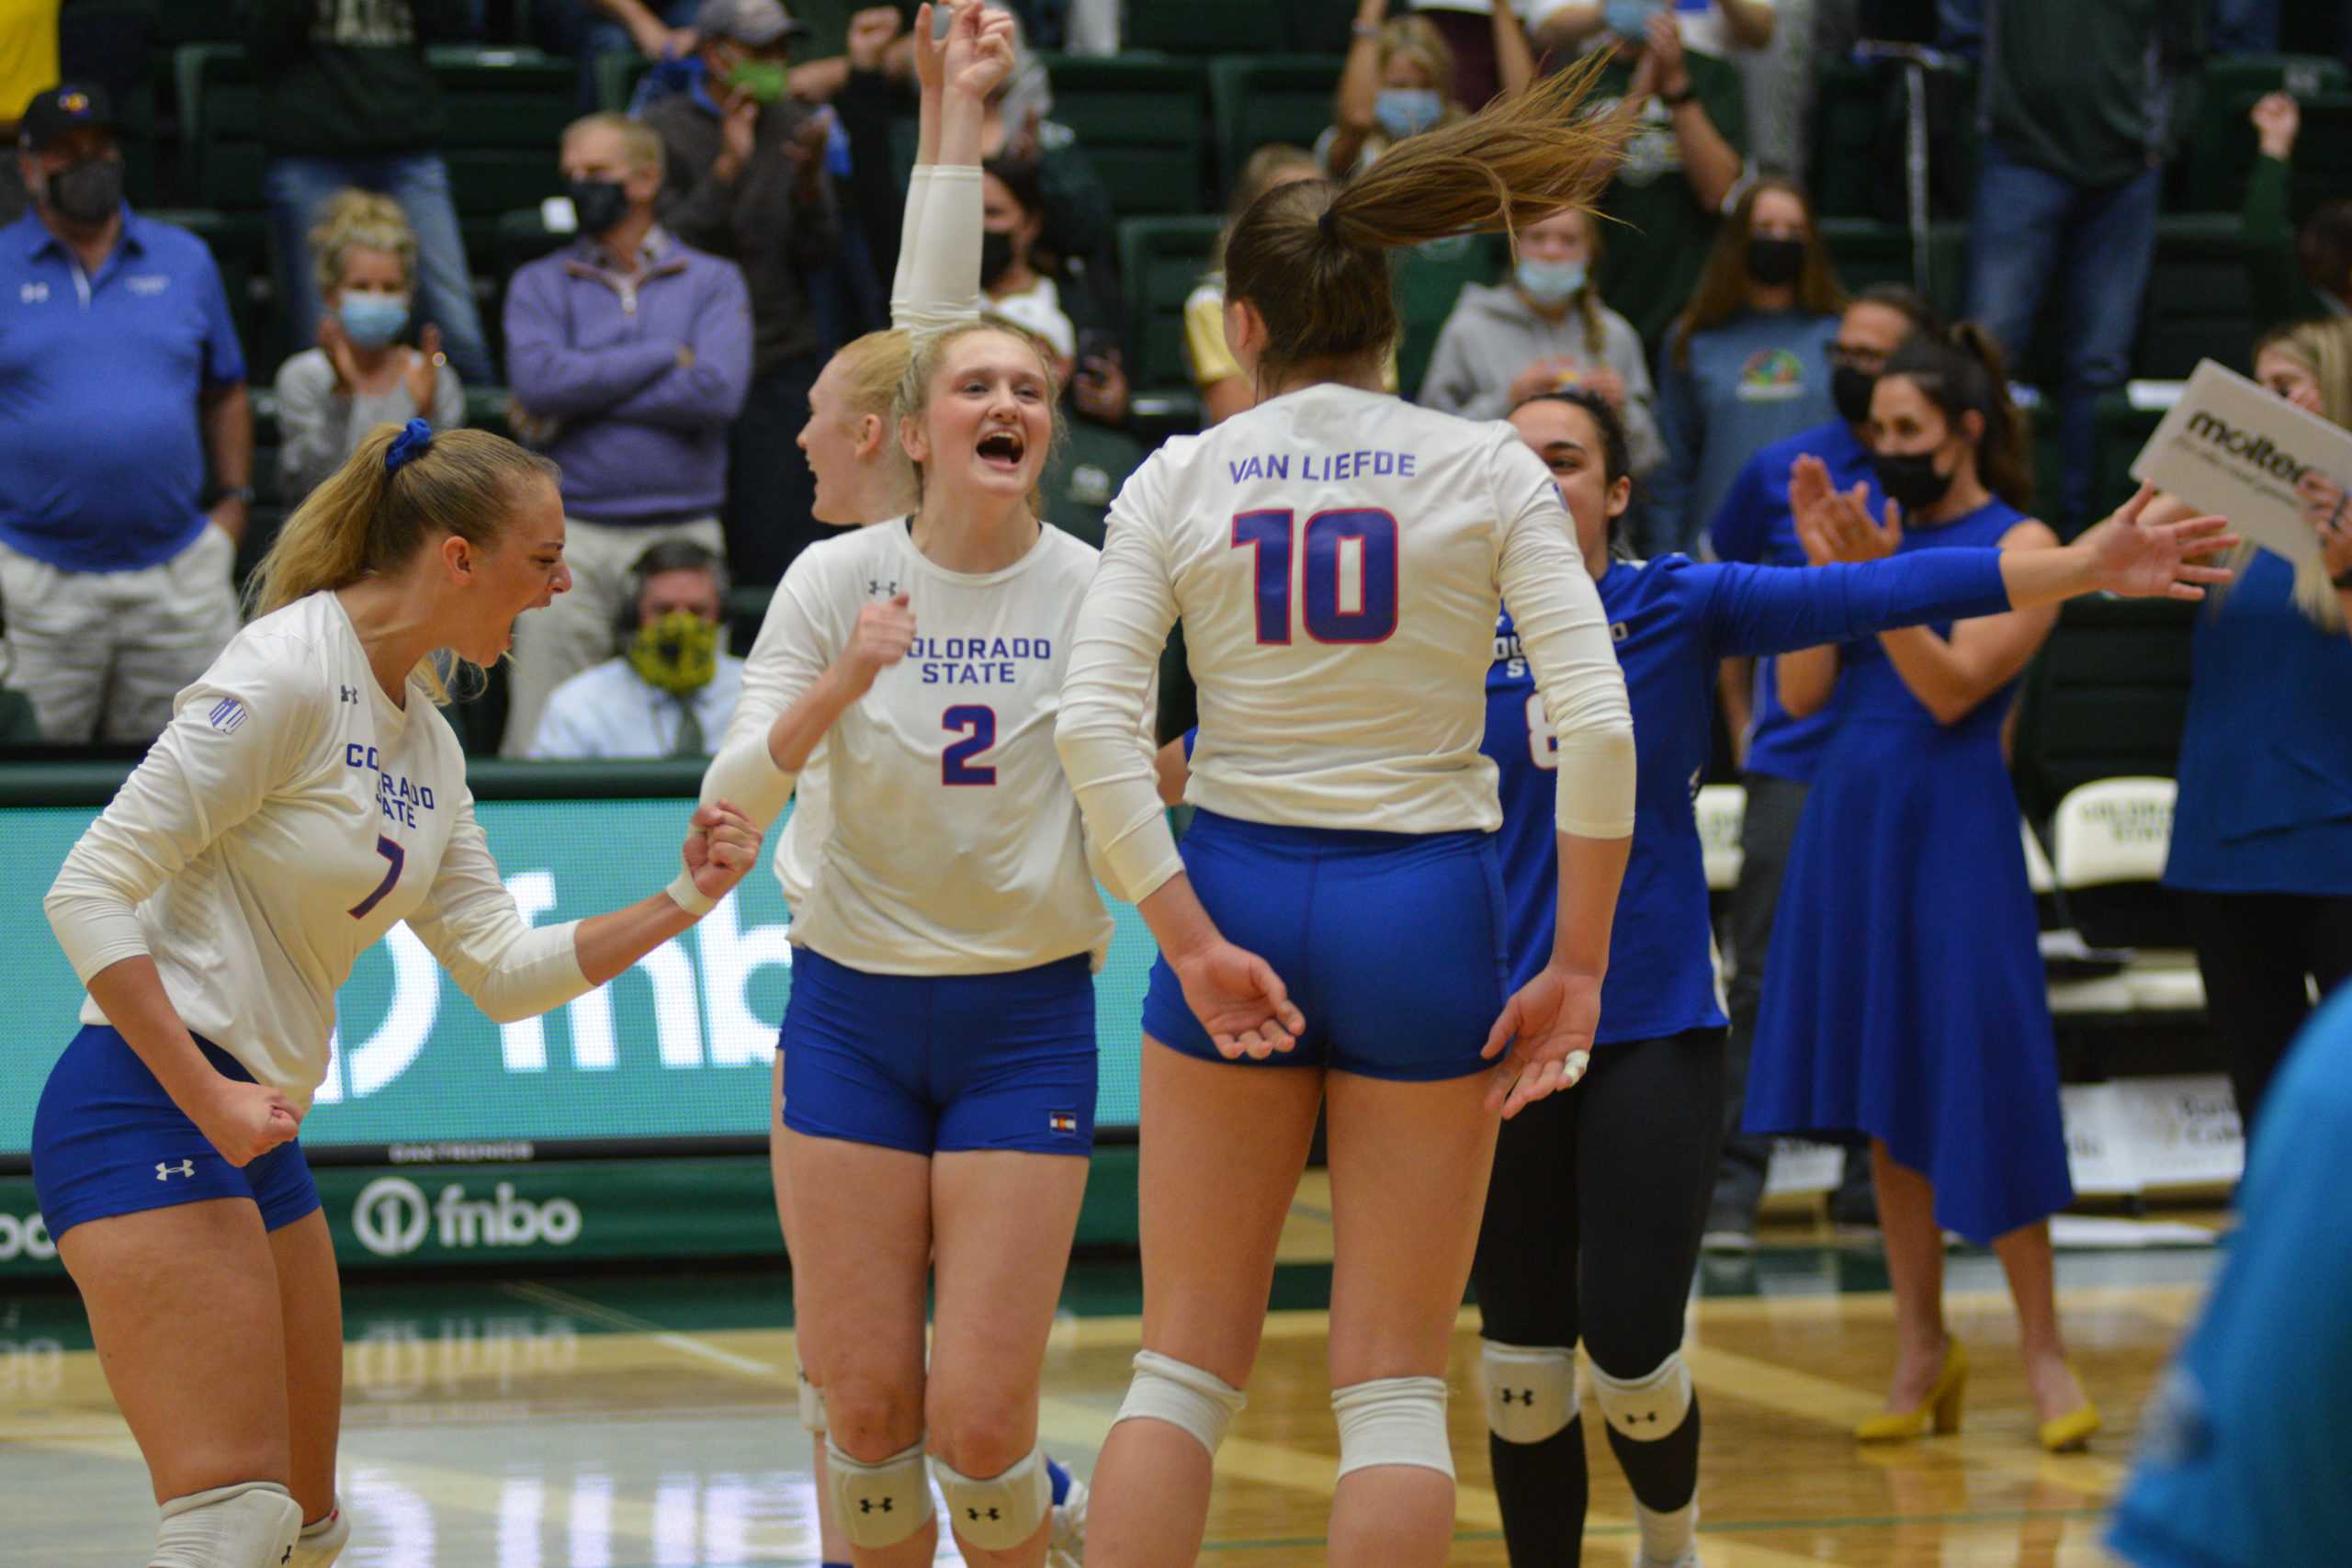 Colorado State volleyball team members celebrate a decision by the referees to award a point to the team